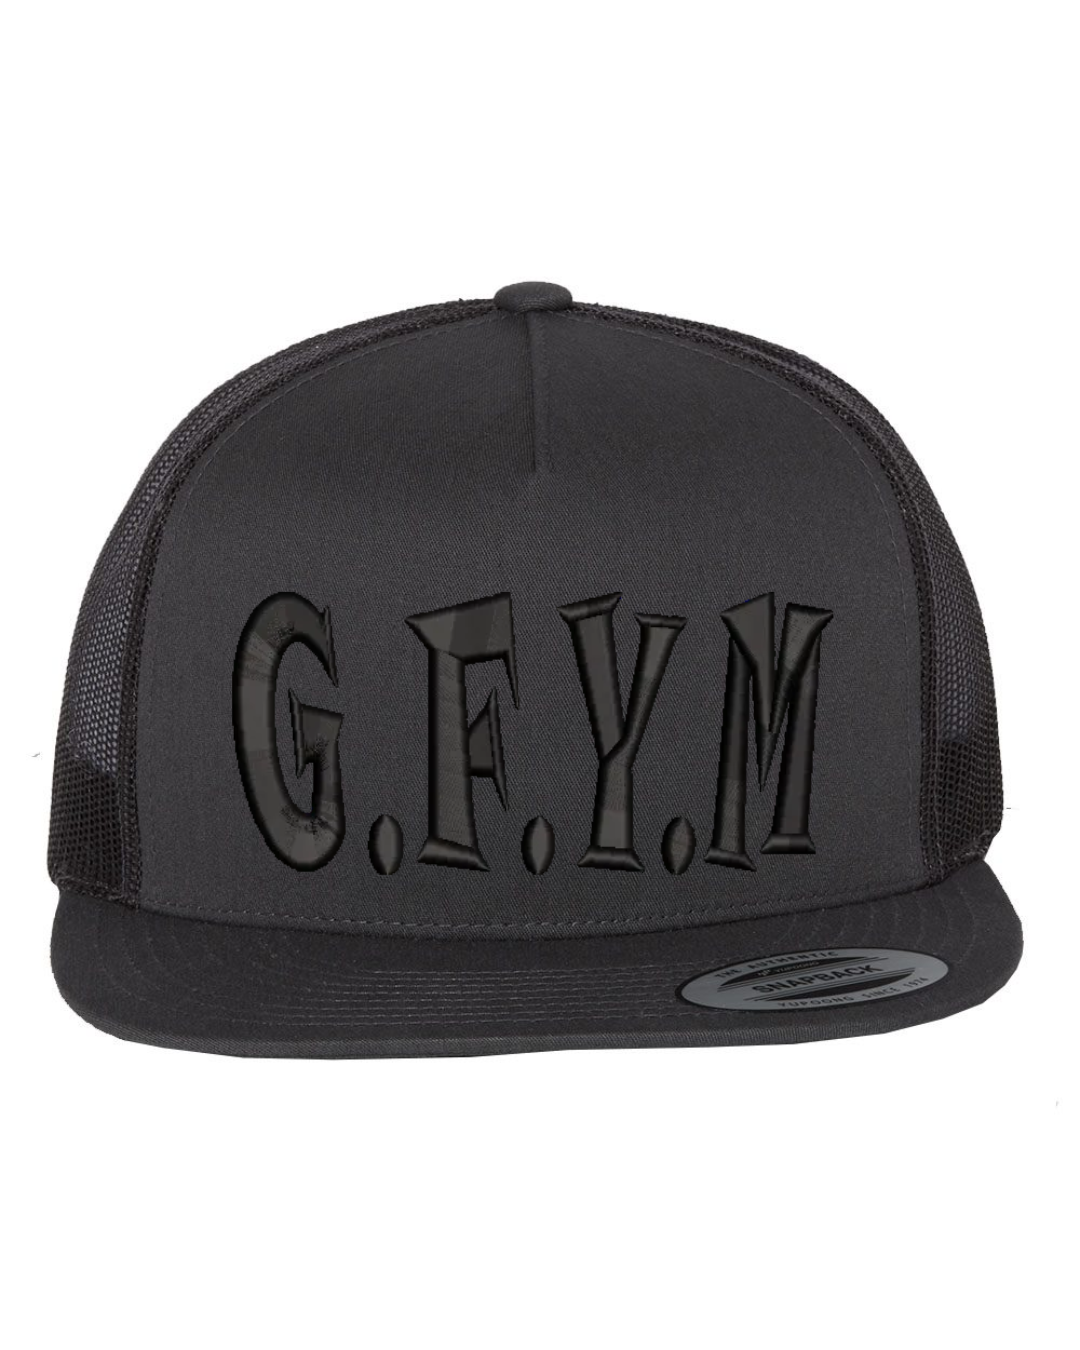 GFYM 3D Puff Blackout Embroidered Hat